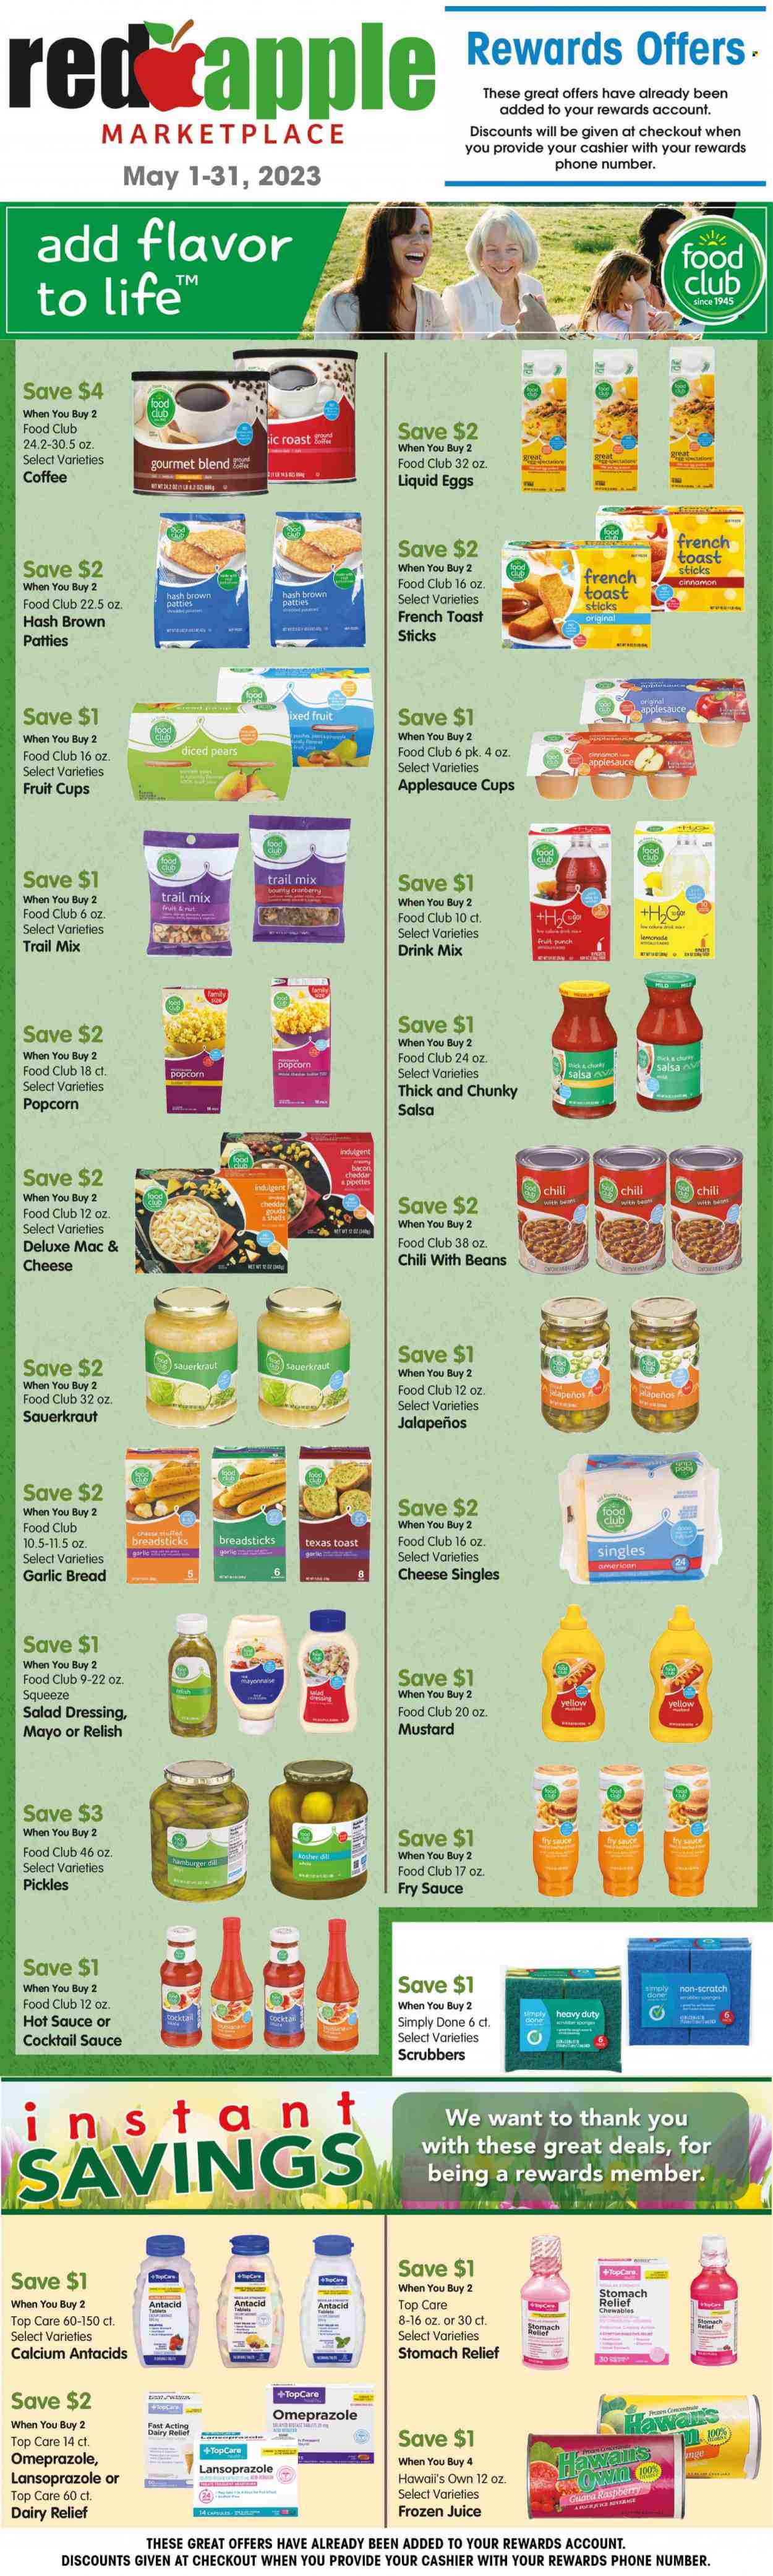 thumbnail - Red Apple Marketplace Flyer - 05/01/2023 - 05/31/2023 - Sales products - bread, potatoes, Bartlett pears, guava, pineapple, pears, fruit cup, hamburger, roast, bacon, gouda, eggs, mayonnaise, Bounty, bread sticks, popcorn, sauerkraut, pickles, dill, cinnamon, cocktail sauce, mustard, salad dressing, hot sauce, ketchup, dressing, salsa, apple sauce, trail mix, lemonade, juice, fruit juice, fruit punch, water, coffee, ground coffee, peaches. Page 1.